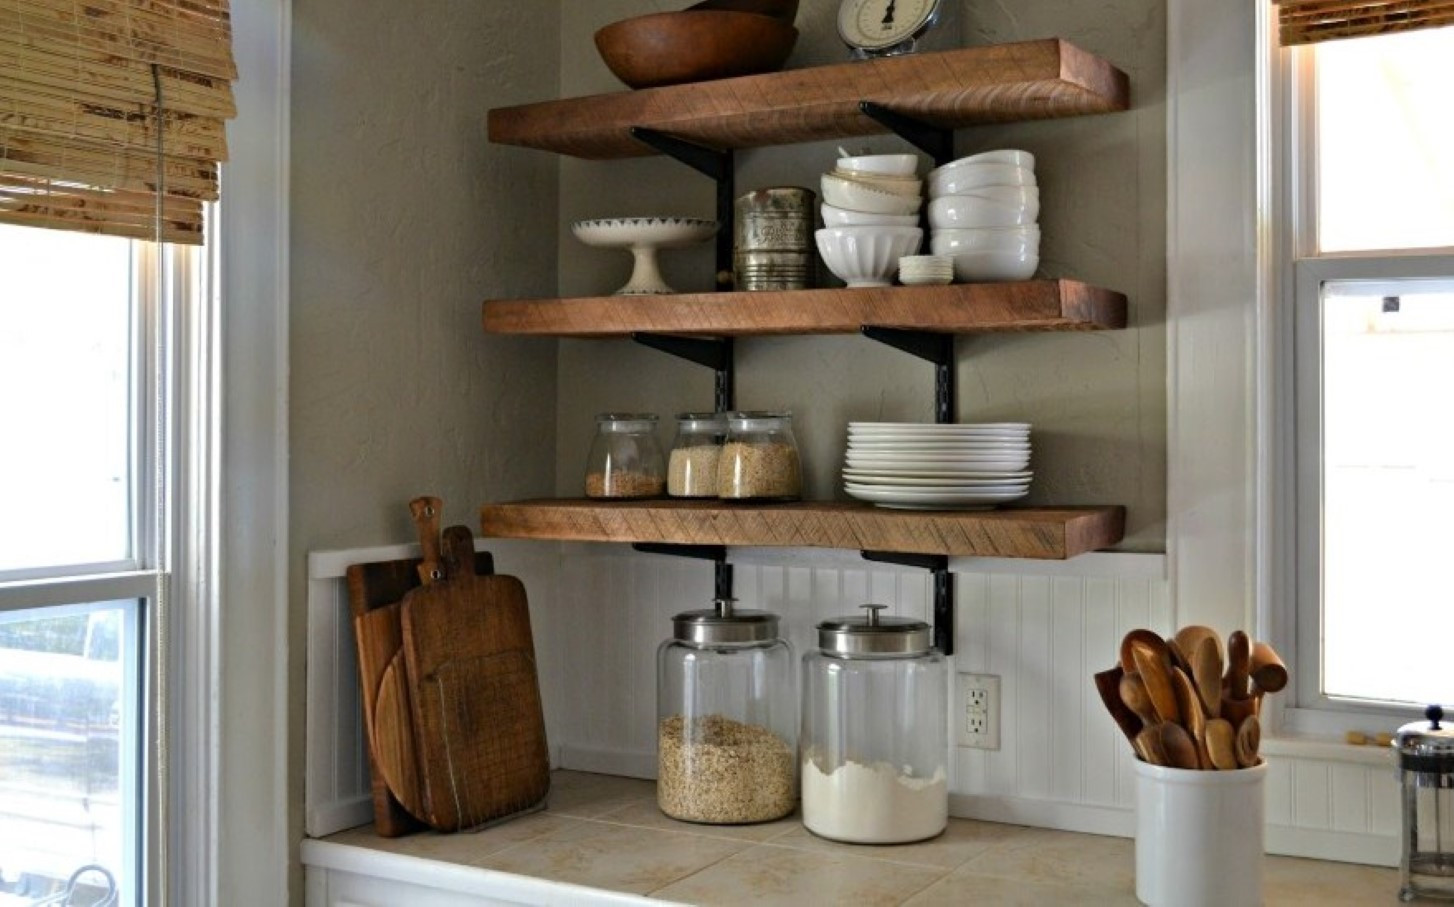 Wall Shelves For Kitchen
 Go Creative with DIY Wall Shelves in Your Interior